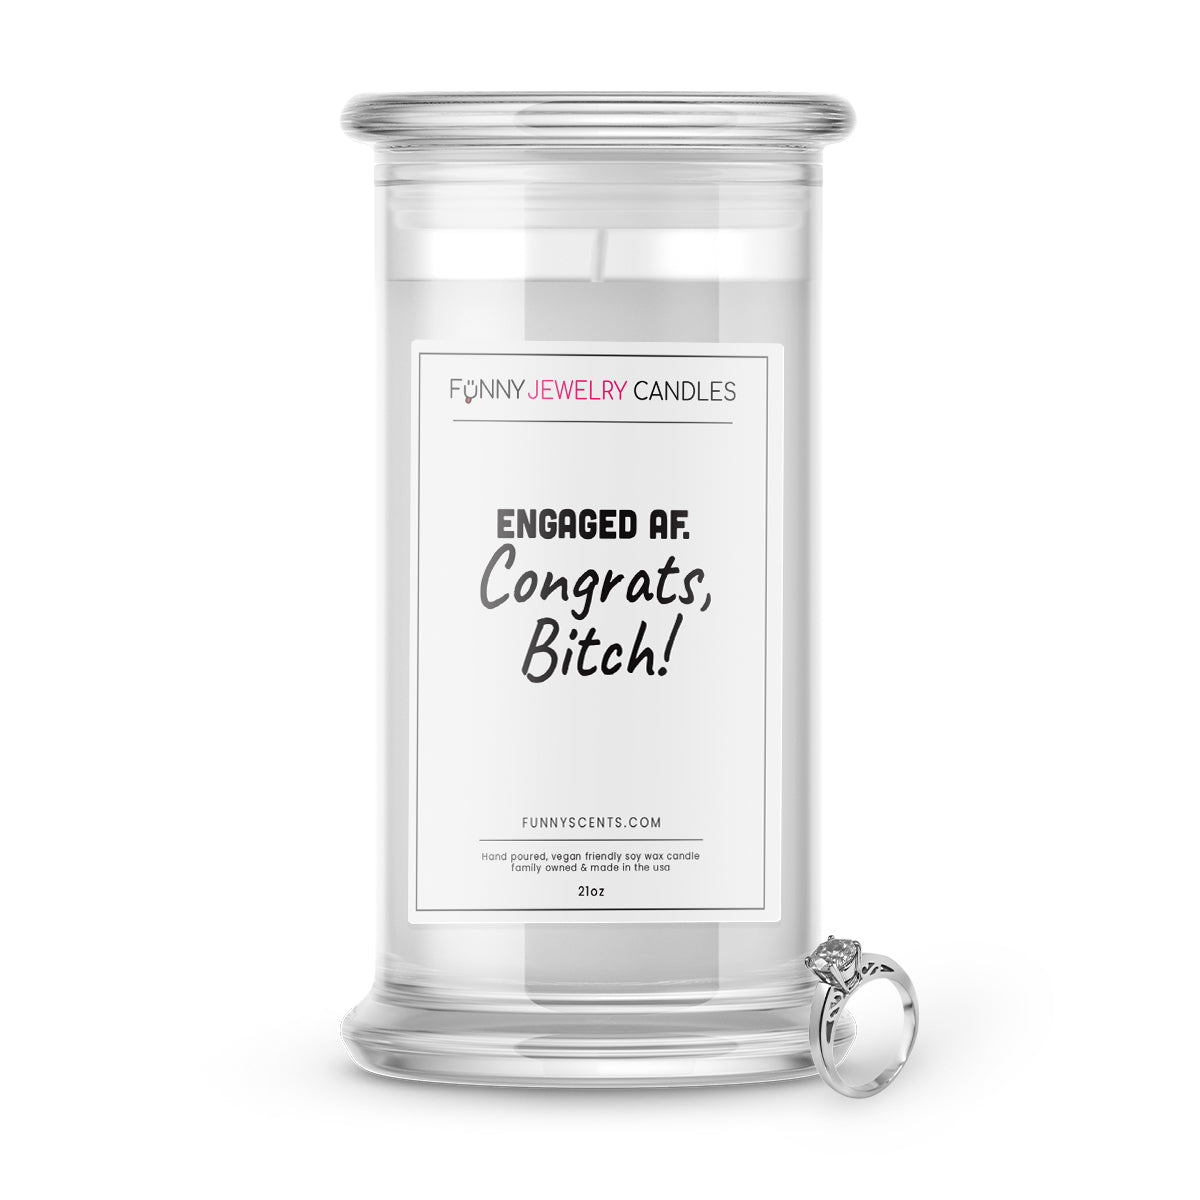 Engaged AF. Congrats, Bitch! Jewelry Funny Candles